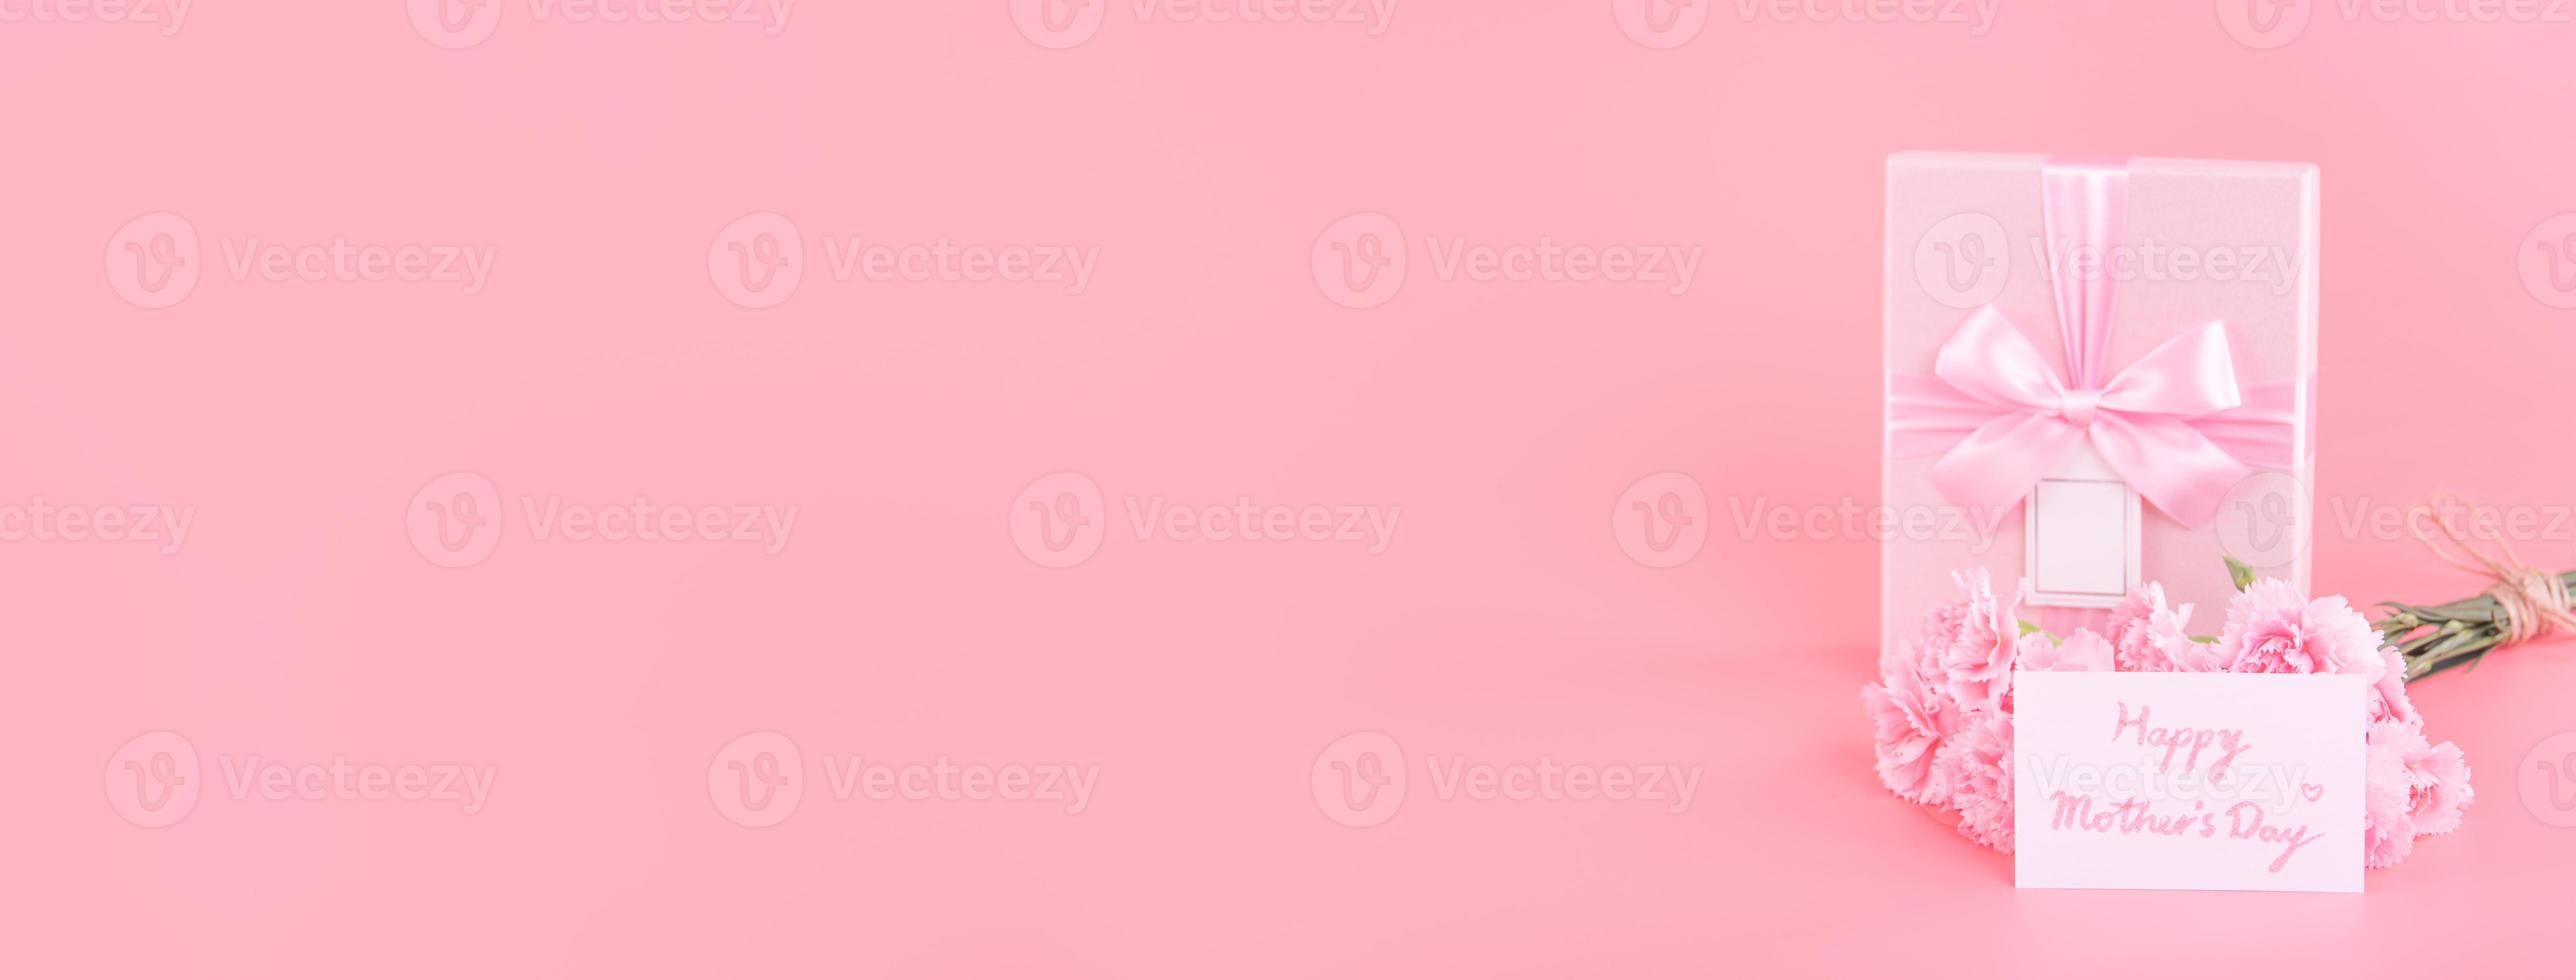 Mother's Day holiday gift design concept, pink carnation flower bouquet with greeting card, isolated on light pink background, copy space. photo